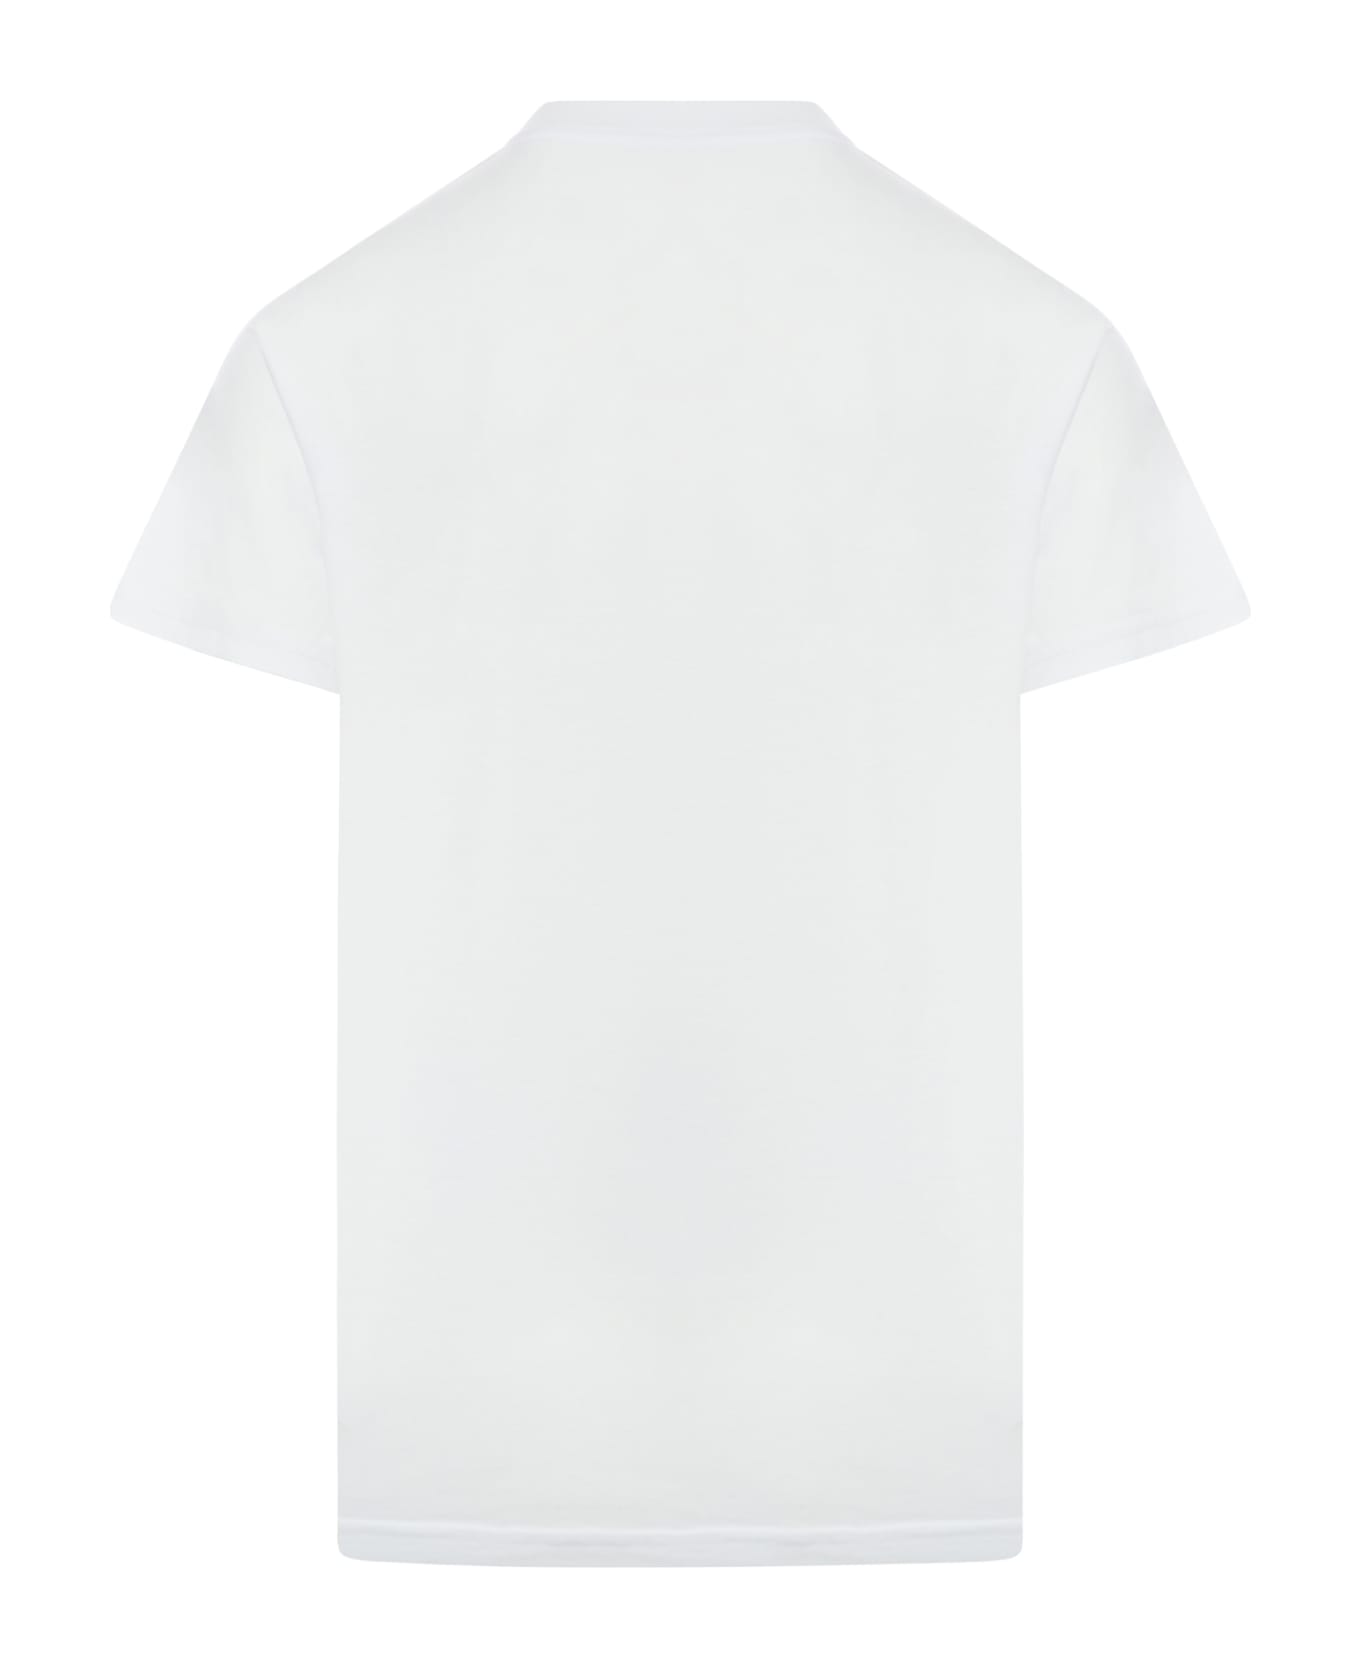 Autry T-shirt Action Man - W White シャツ